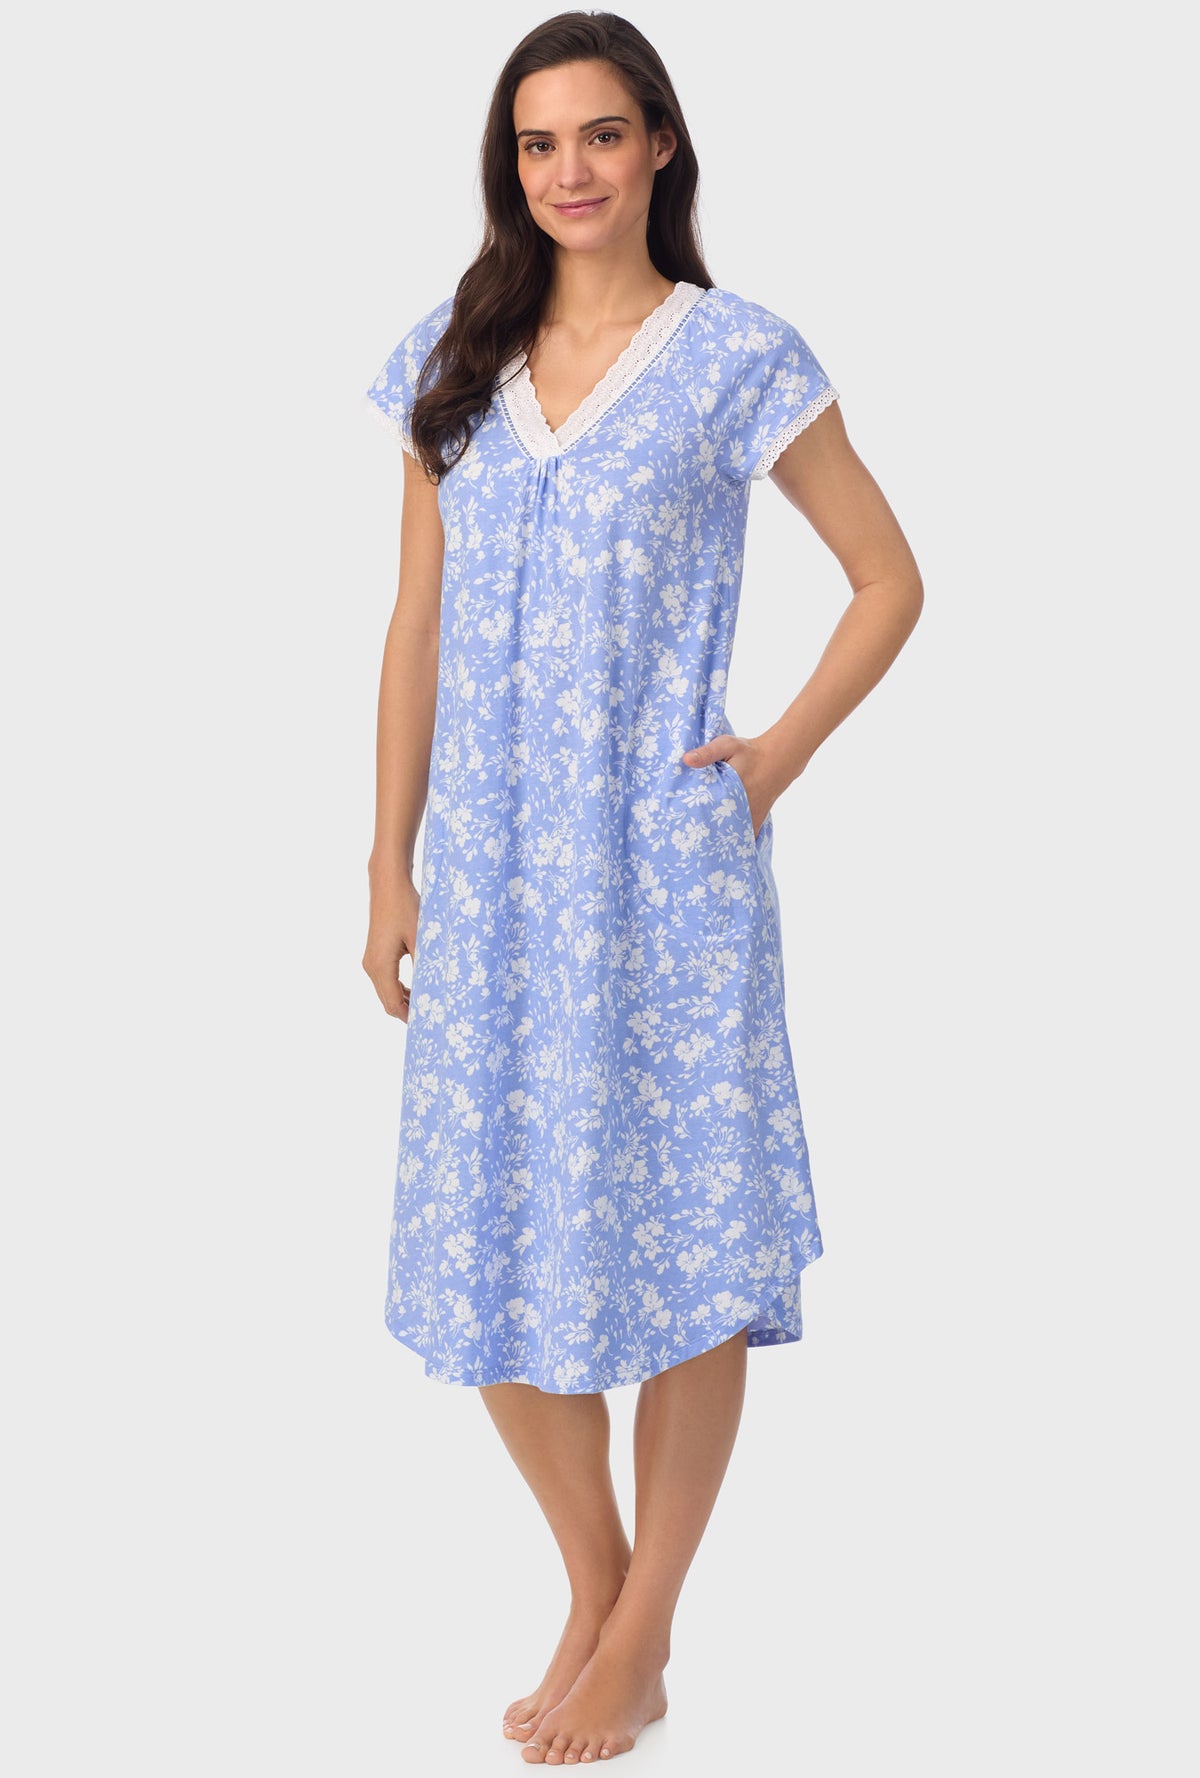 A lady wearing blue short Sleeve Floral Cap Sleeve Nightgown  with Powder Blue print